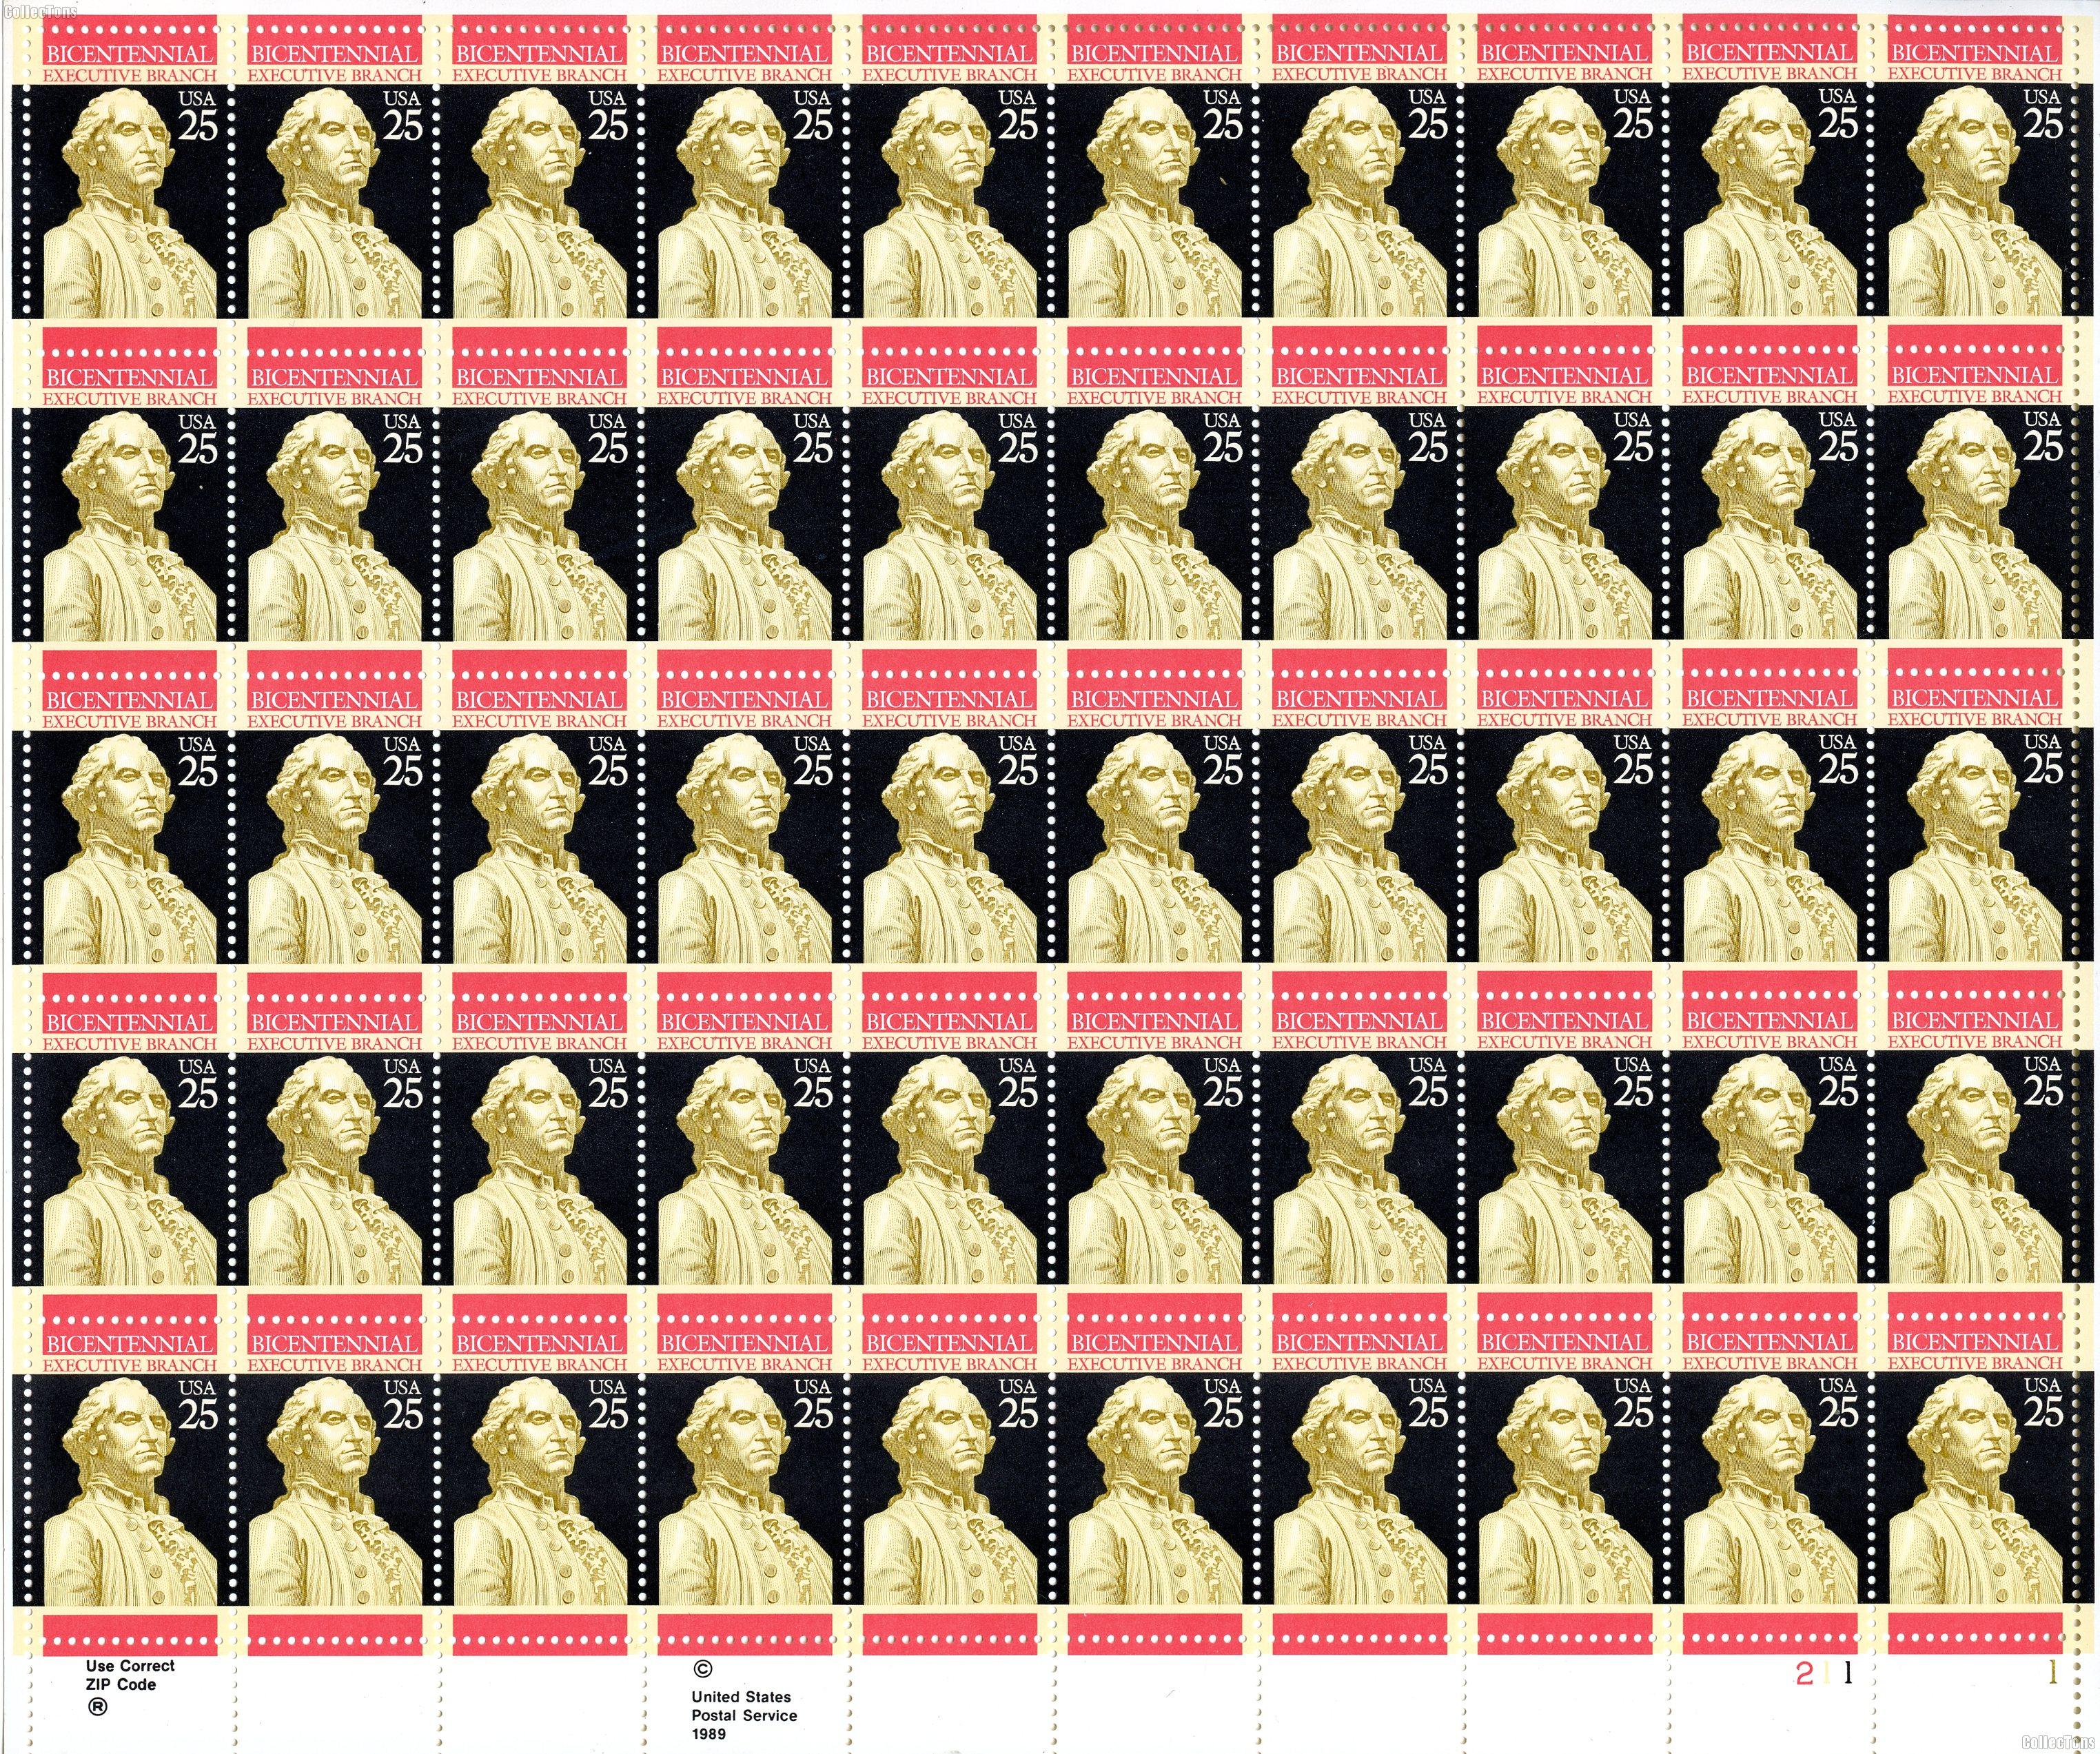 1989 Executive Branch and George Washington Memorial 25 Cent US Postage Stamp MNH Sheet of 50 Scott #2414